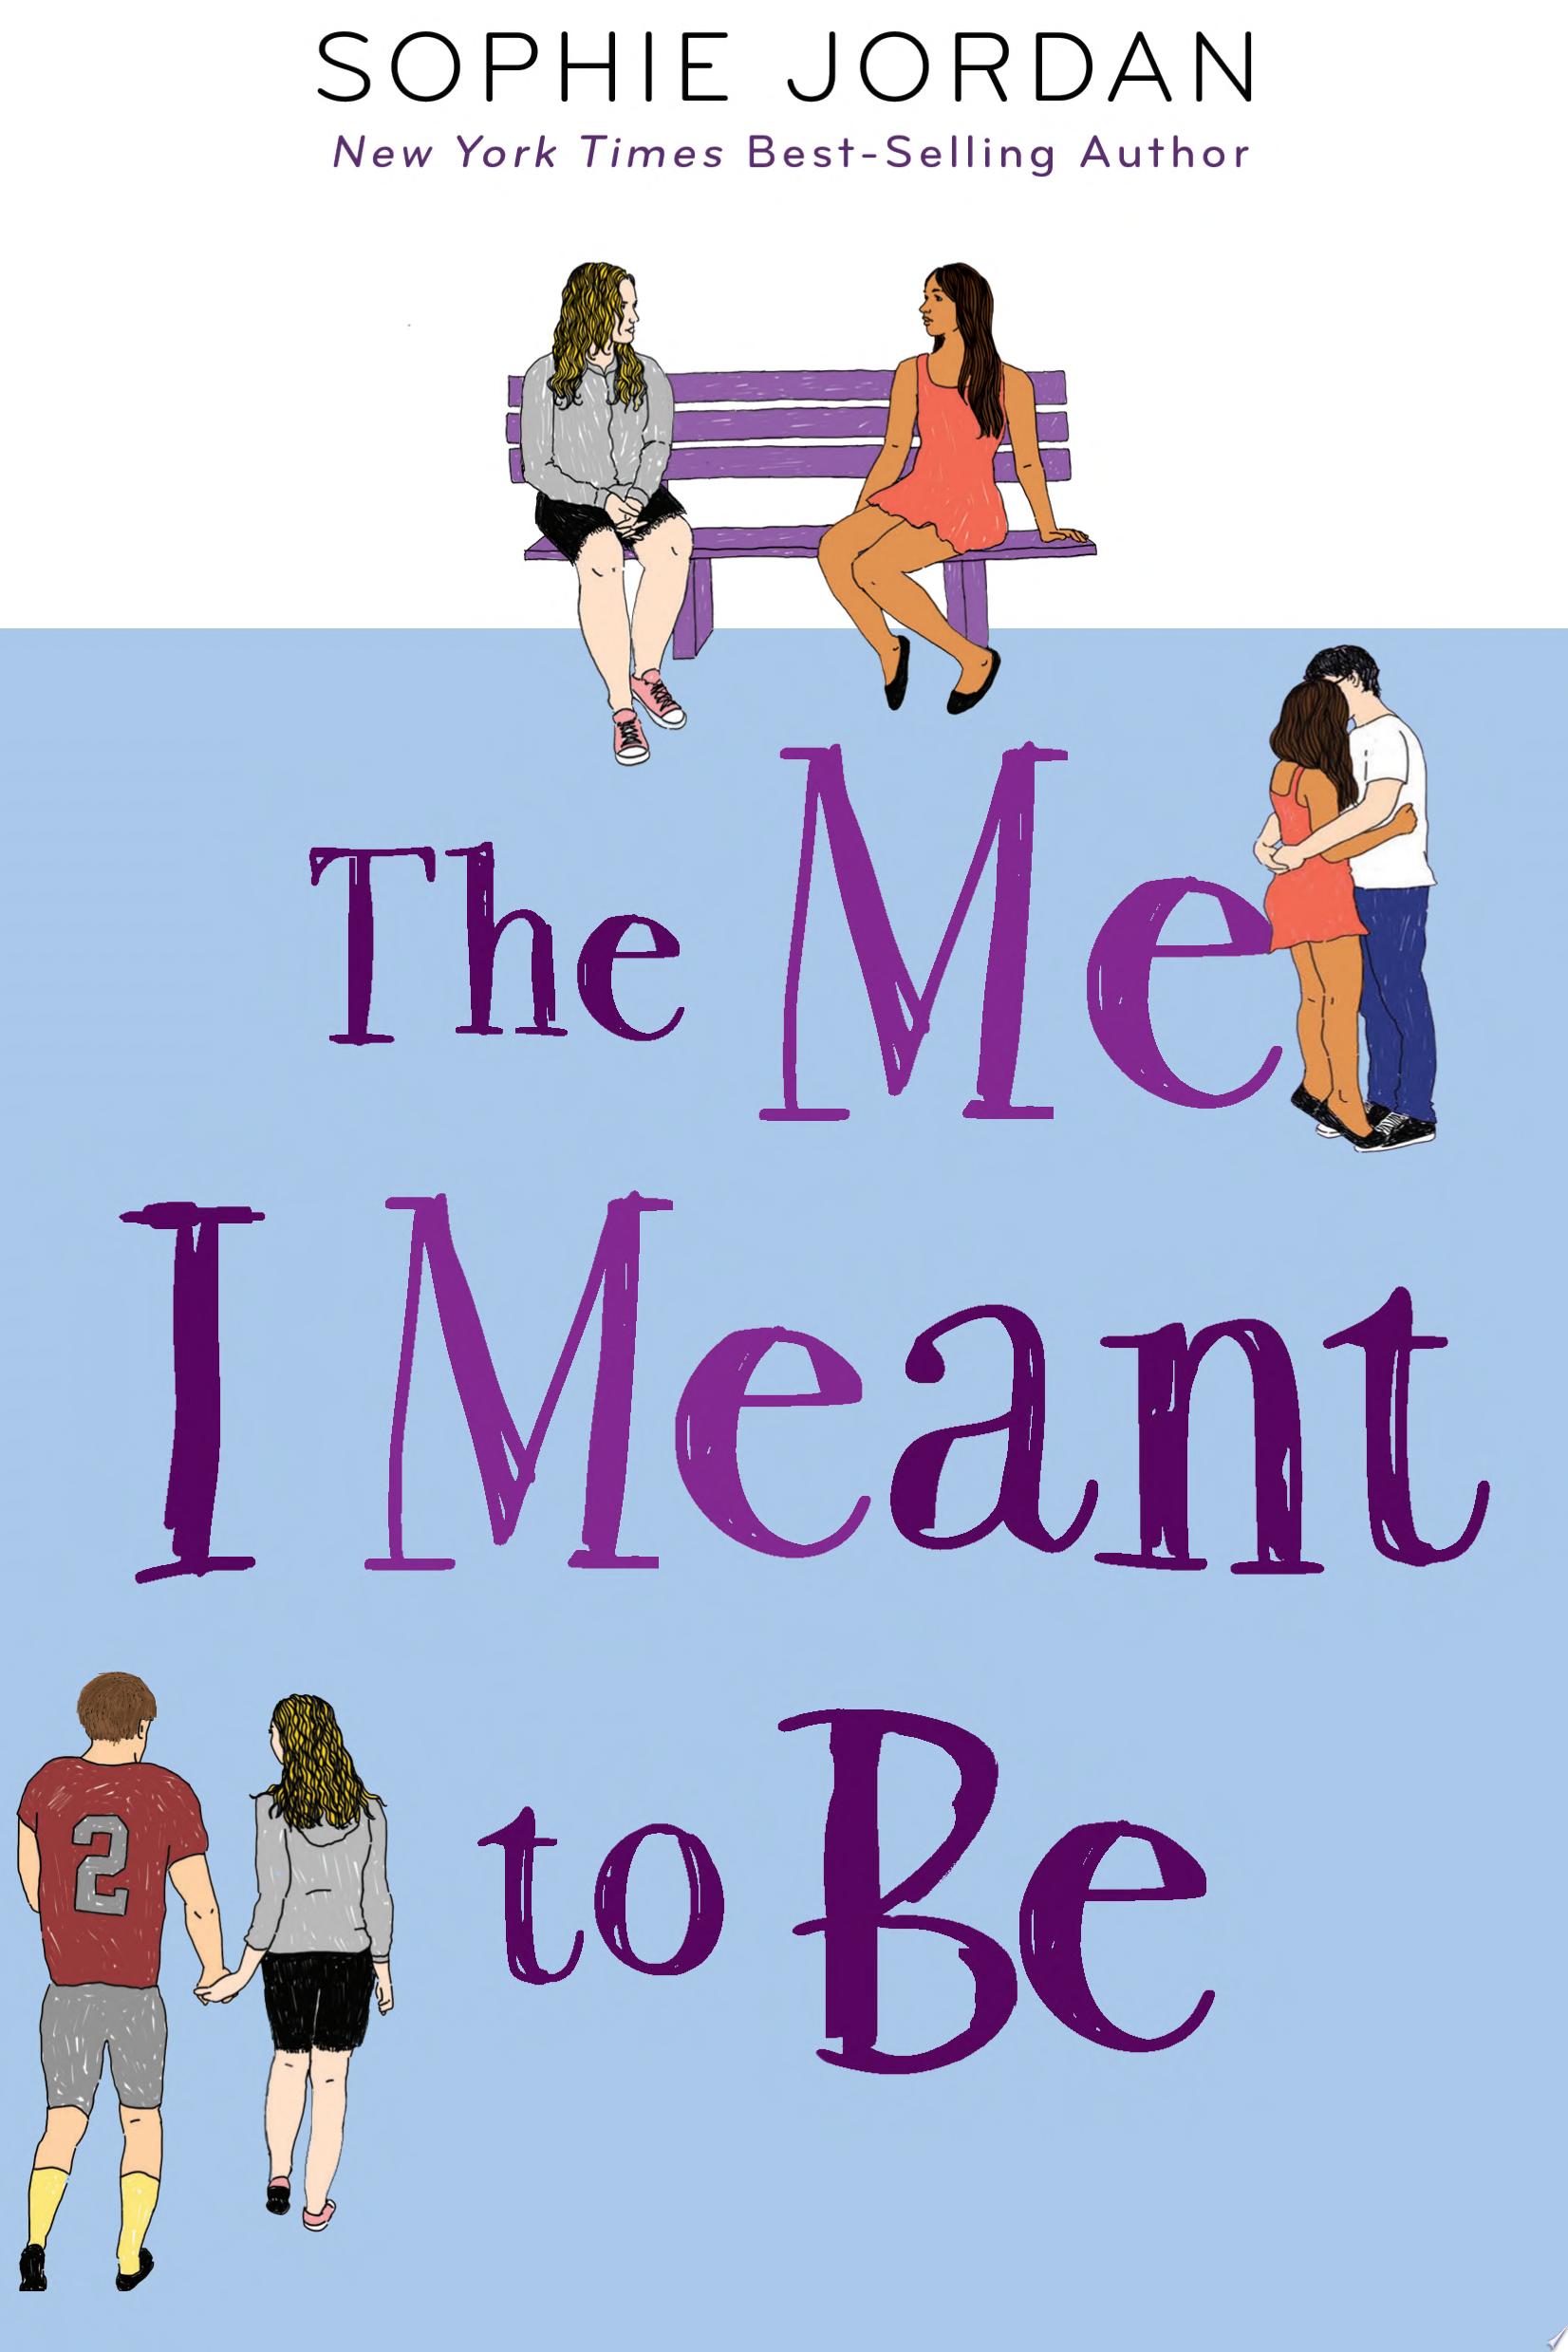 Image for "The Me I Meant to Be"